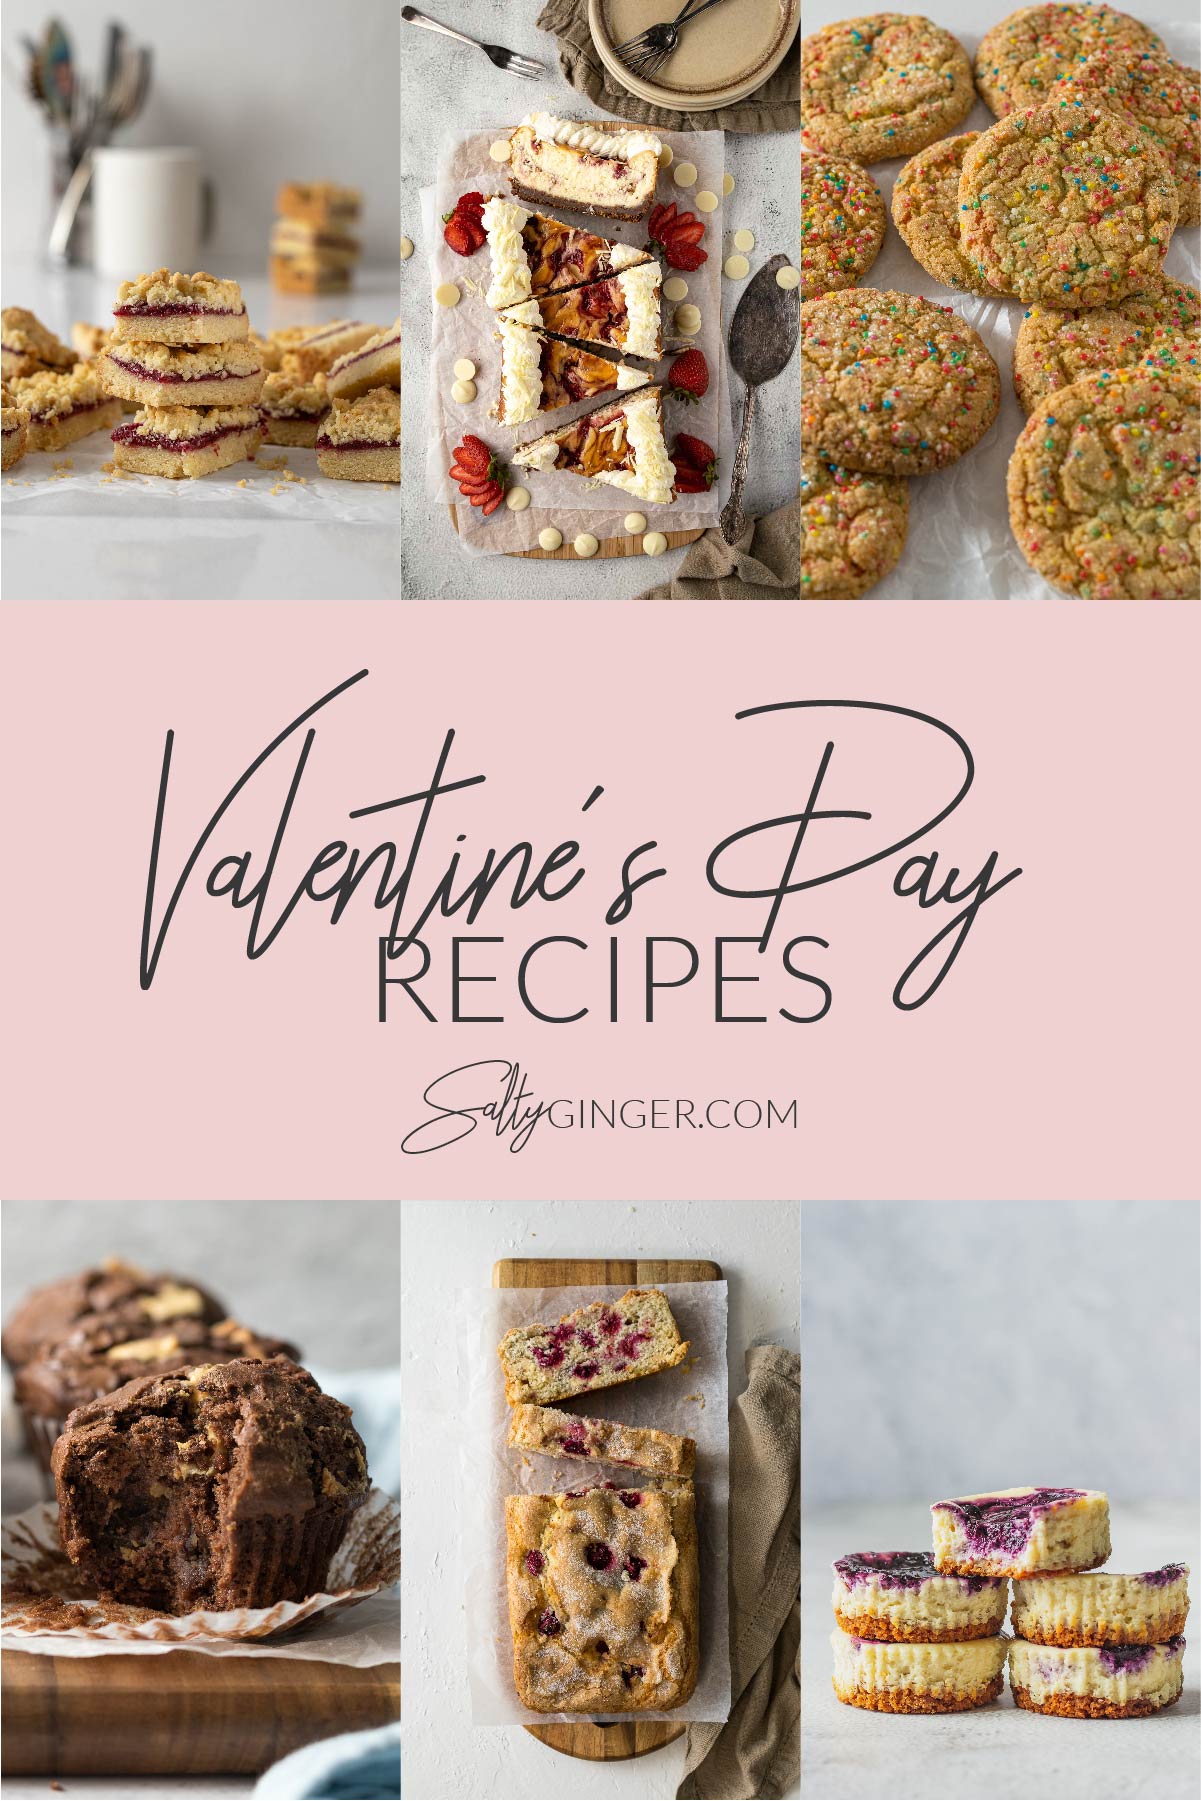 Valentine's Day Recipe collage showing strawberry cheesecake, triple chocolate muffins, raspberry white chocolate loaf cake, sprinkle sugar cookies, jam squares and mini cheesecakes.